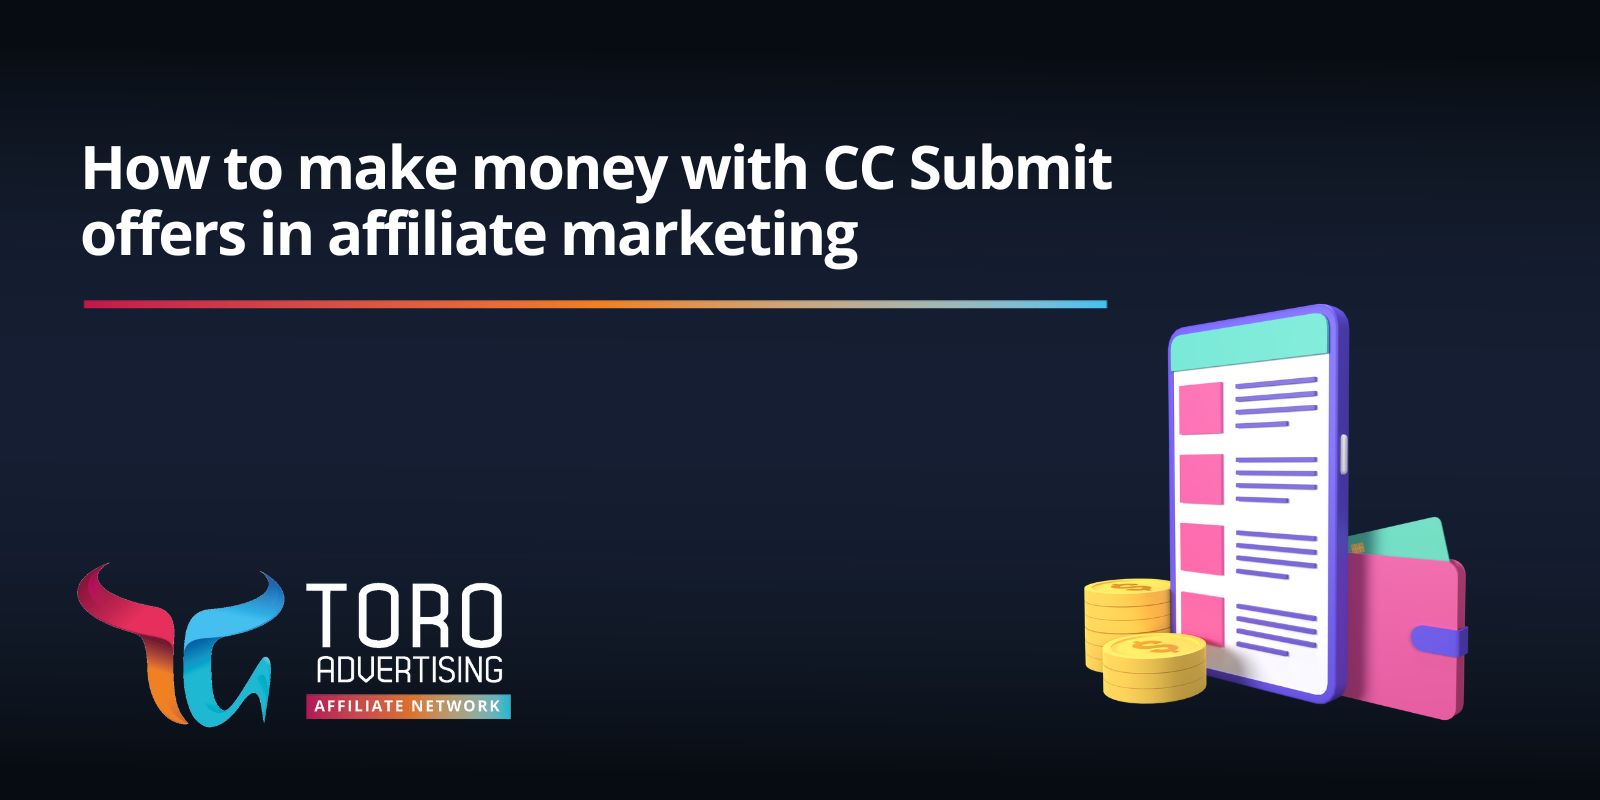 How to make money with cc submit offers in affiliate marketing